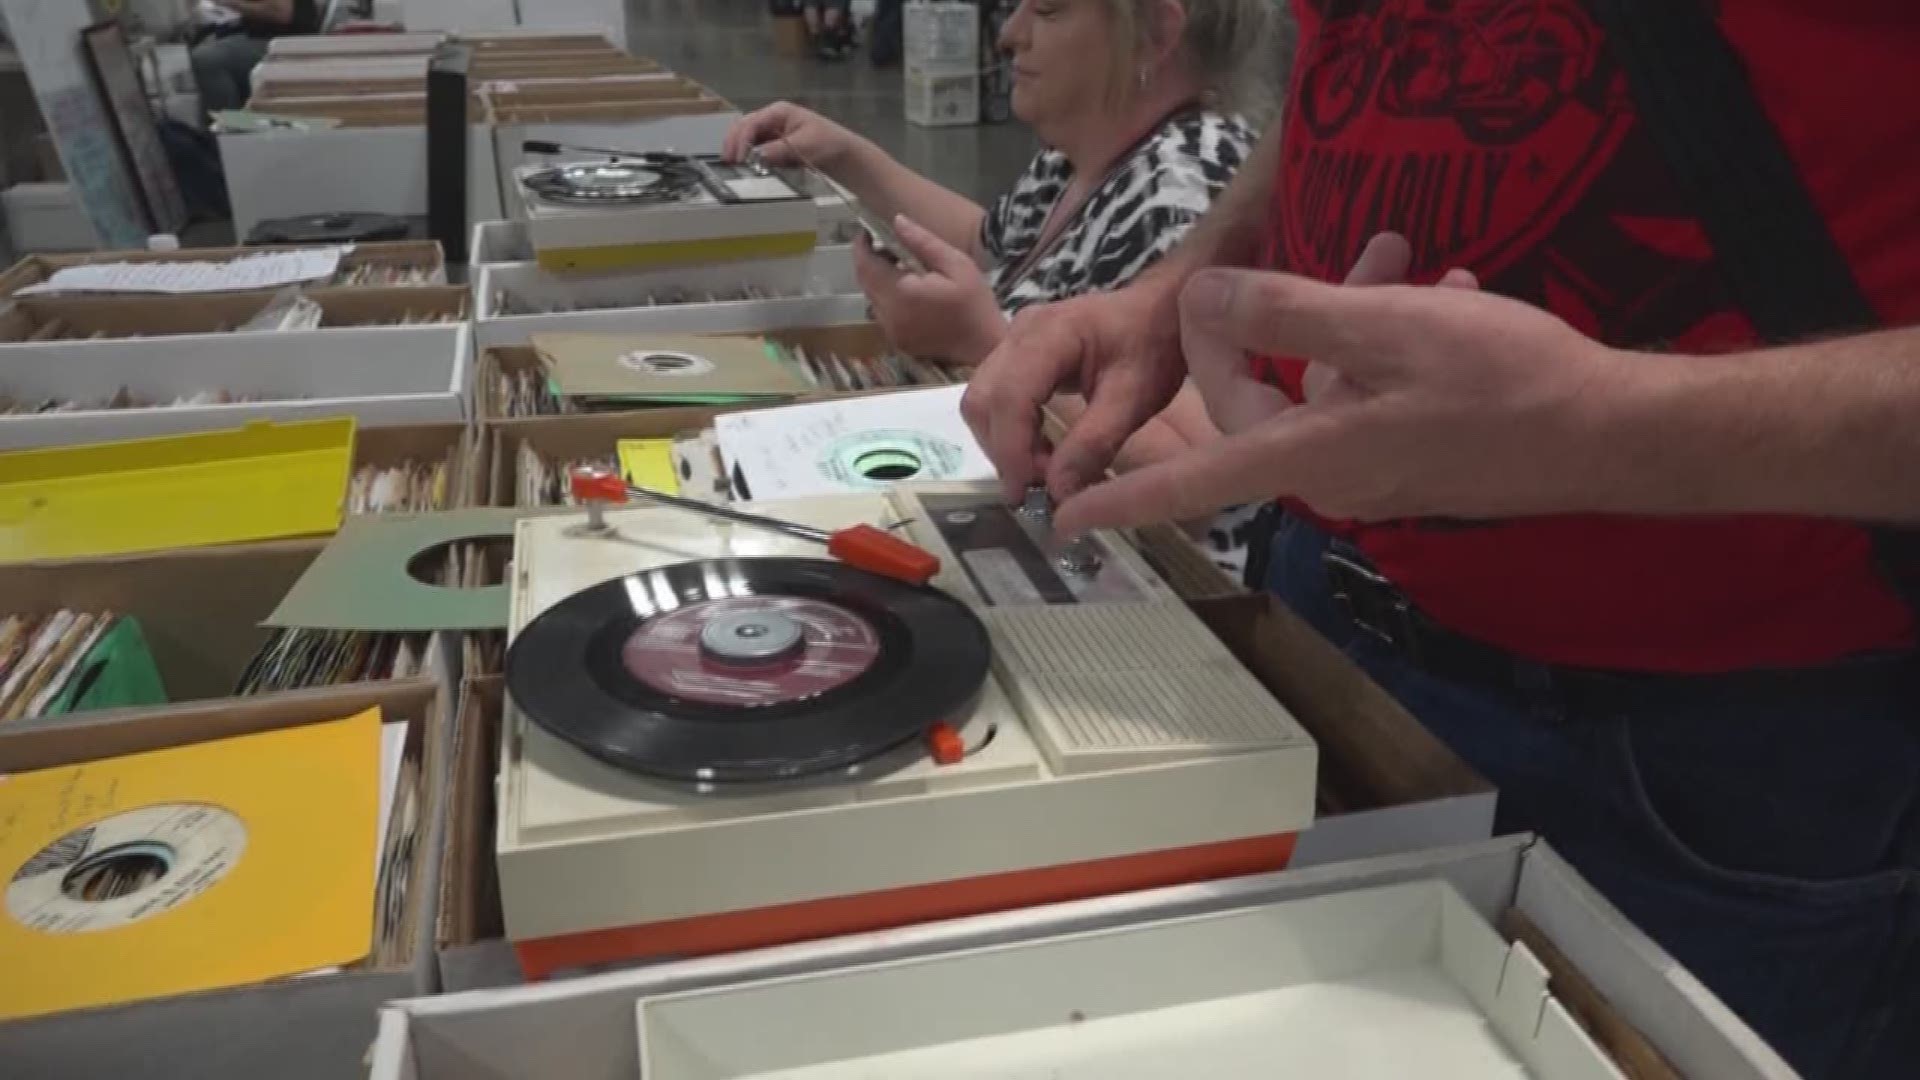 The three-day Austin Record Convention wrapped up this afternoon. Since 1981, the event has pulled in millions of visitors, dealers and collectors to share their love for the music culture.